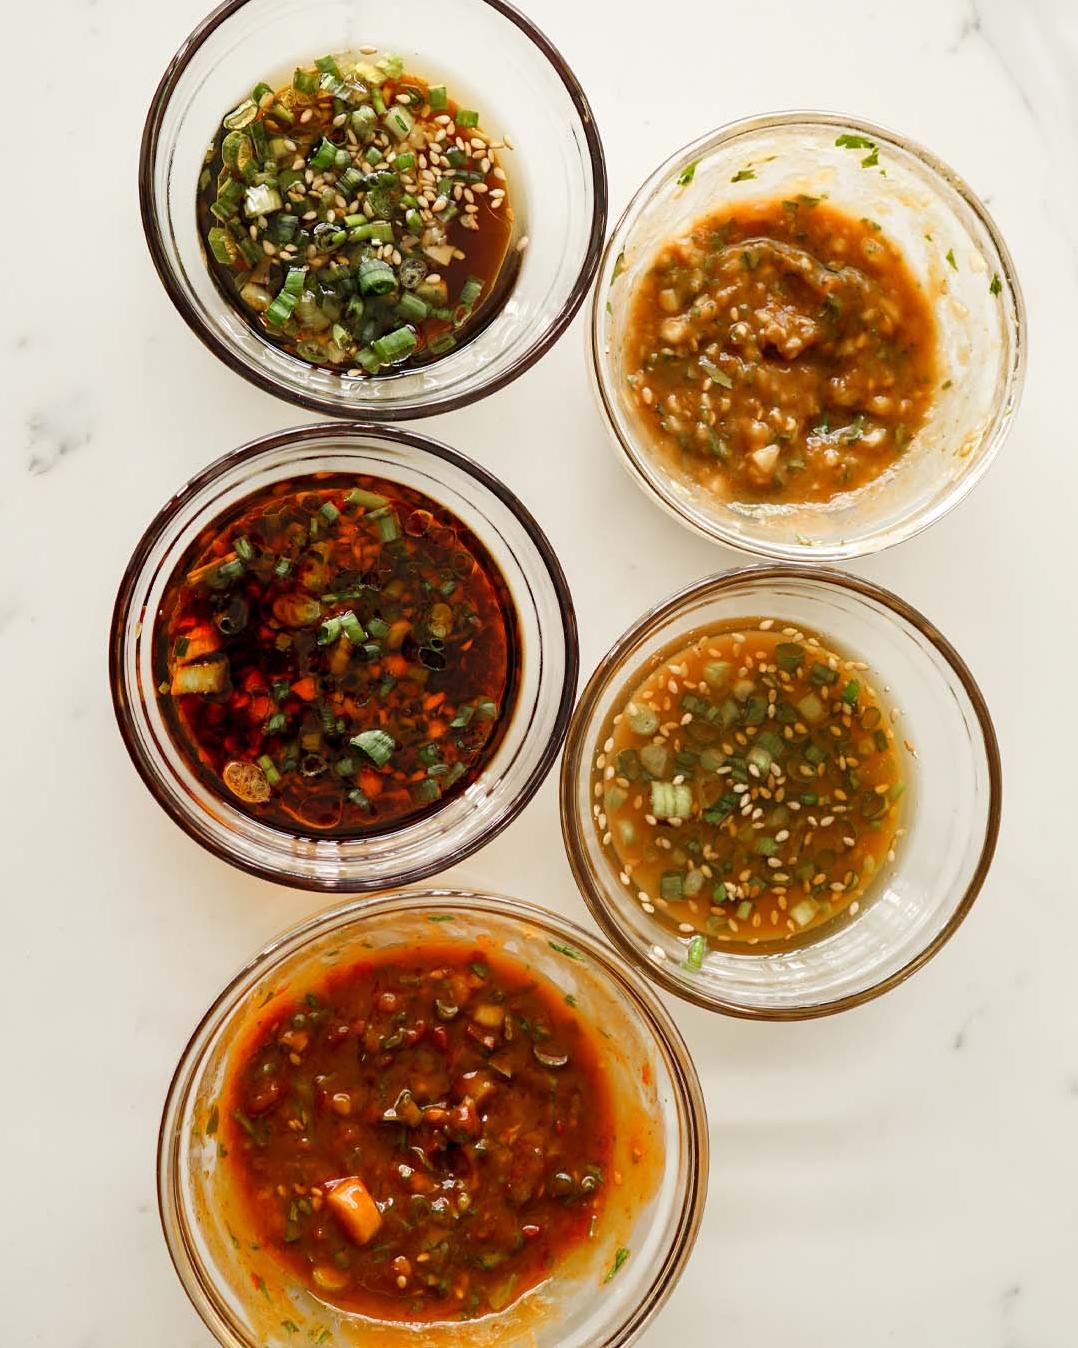  Vibrant and flavorful, these sauces will spice up your hotpot experience.